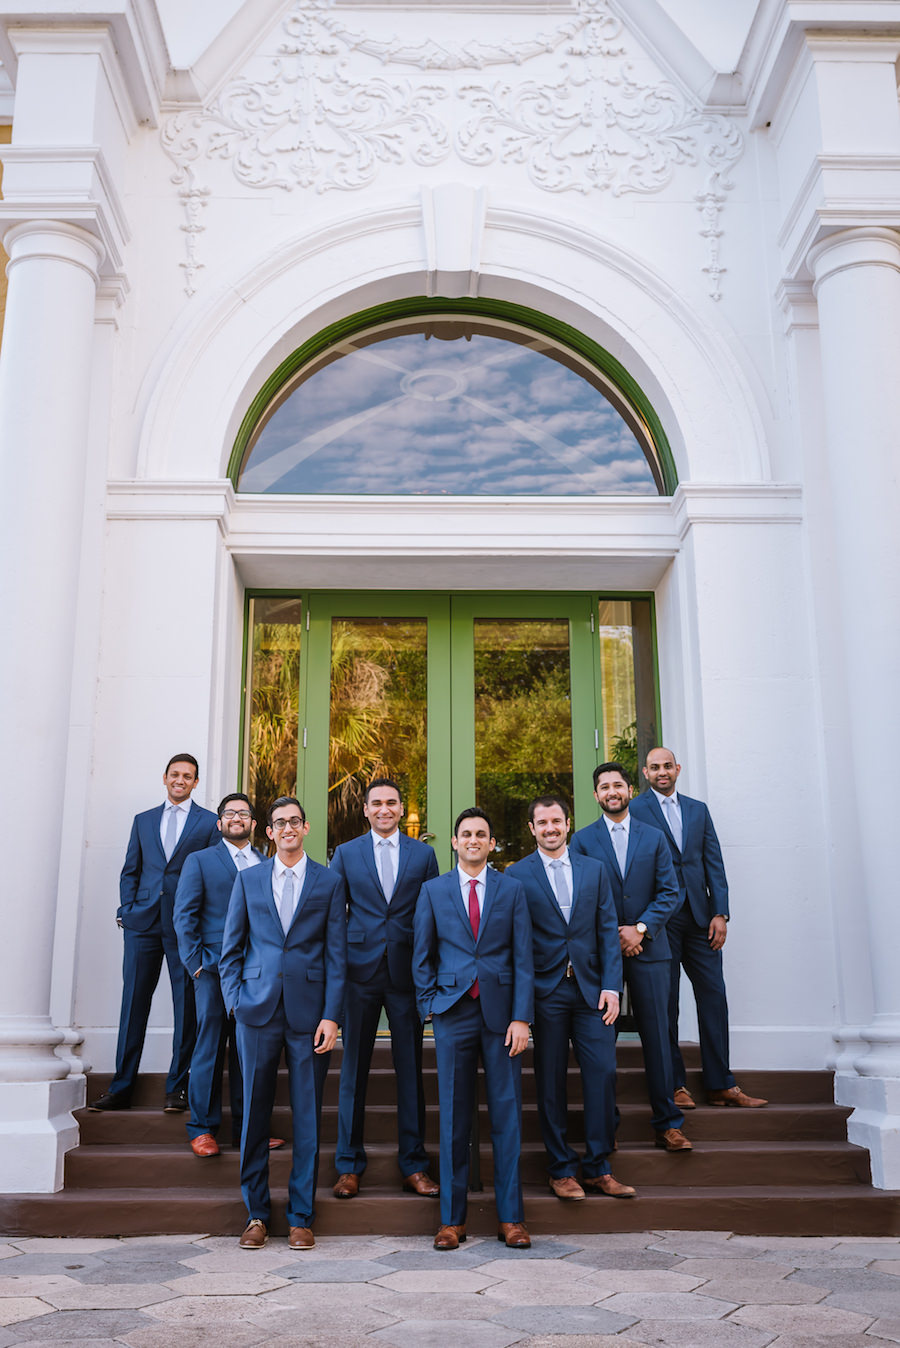 Downtown St. Pete Bridal Party Groomsmen in Navy Blue Suits | Wedding Videography by Imagery Wedding Films